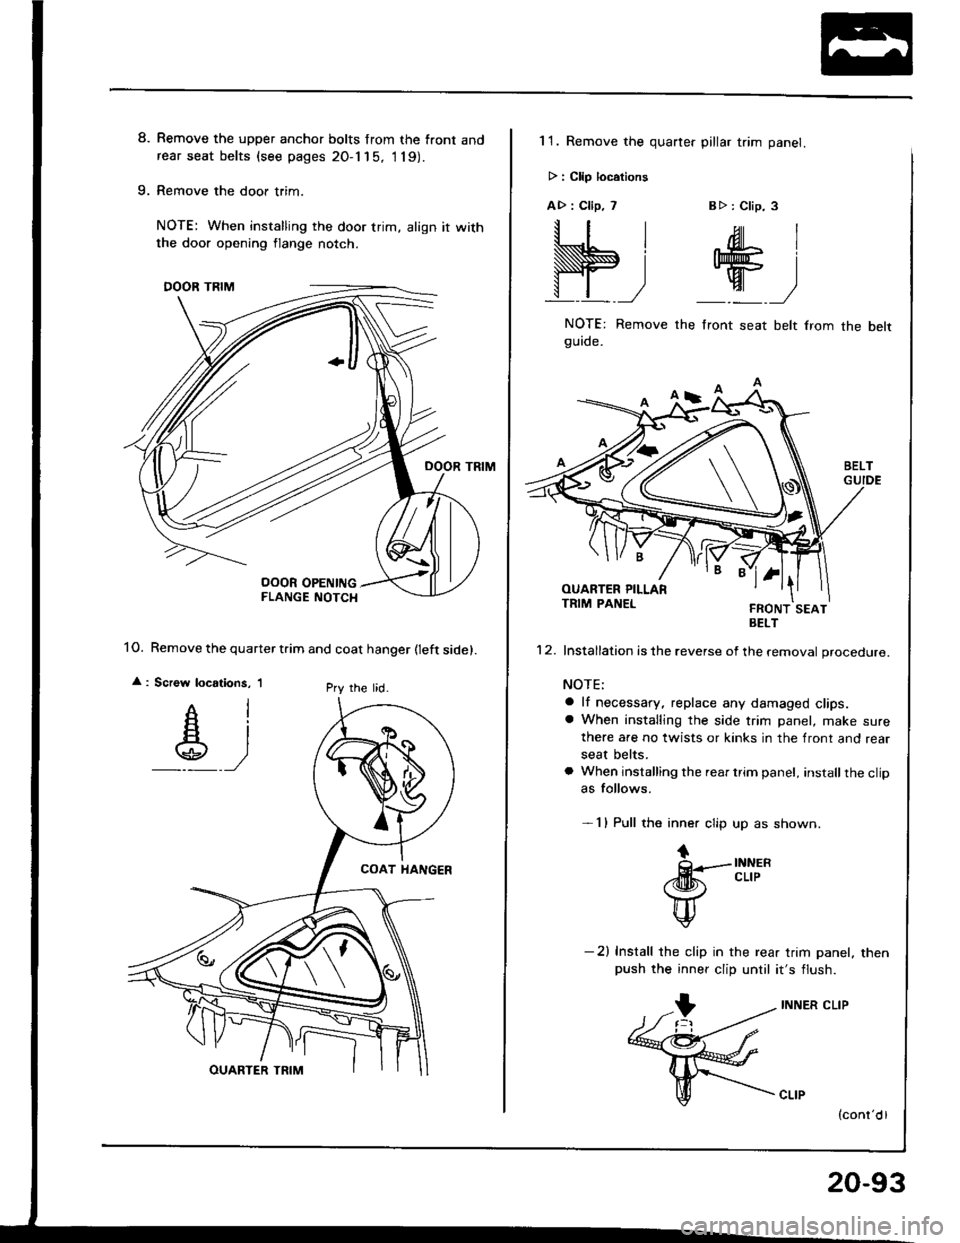 HONDA INTEGRA 1994 4.G Workshop Manual 8. Remove the upper anchor bolts from the front andrear seat belts (see pages 20-1 15, 1 19).
9. Remove the door trim.
NOTE: When installing the door trim, align it with
1O. Remove the quarter tiim an